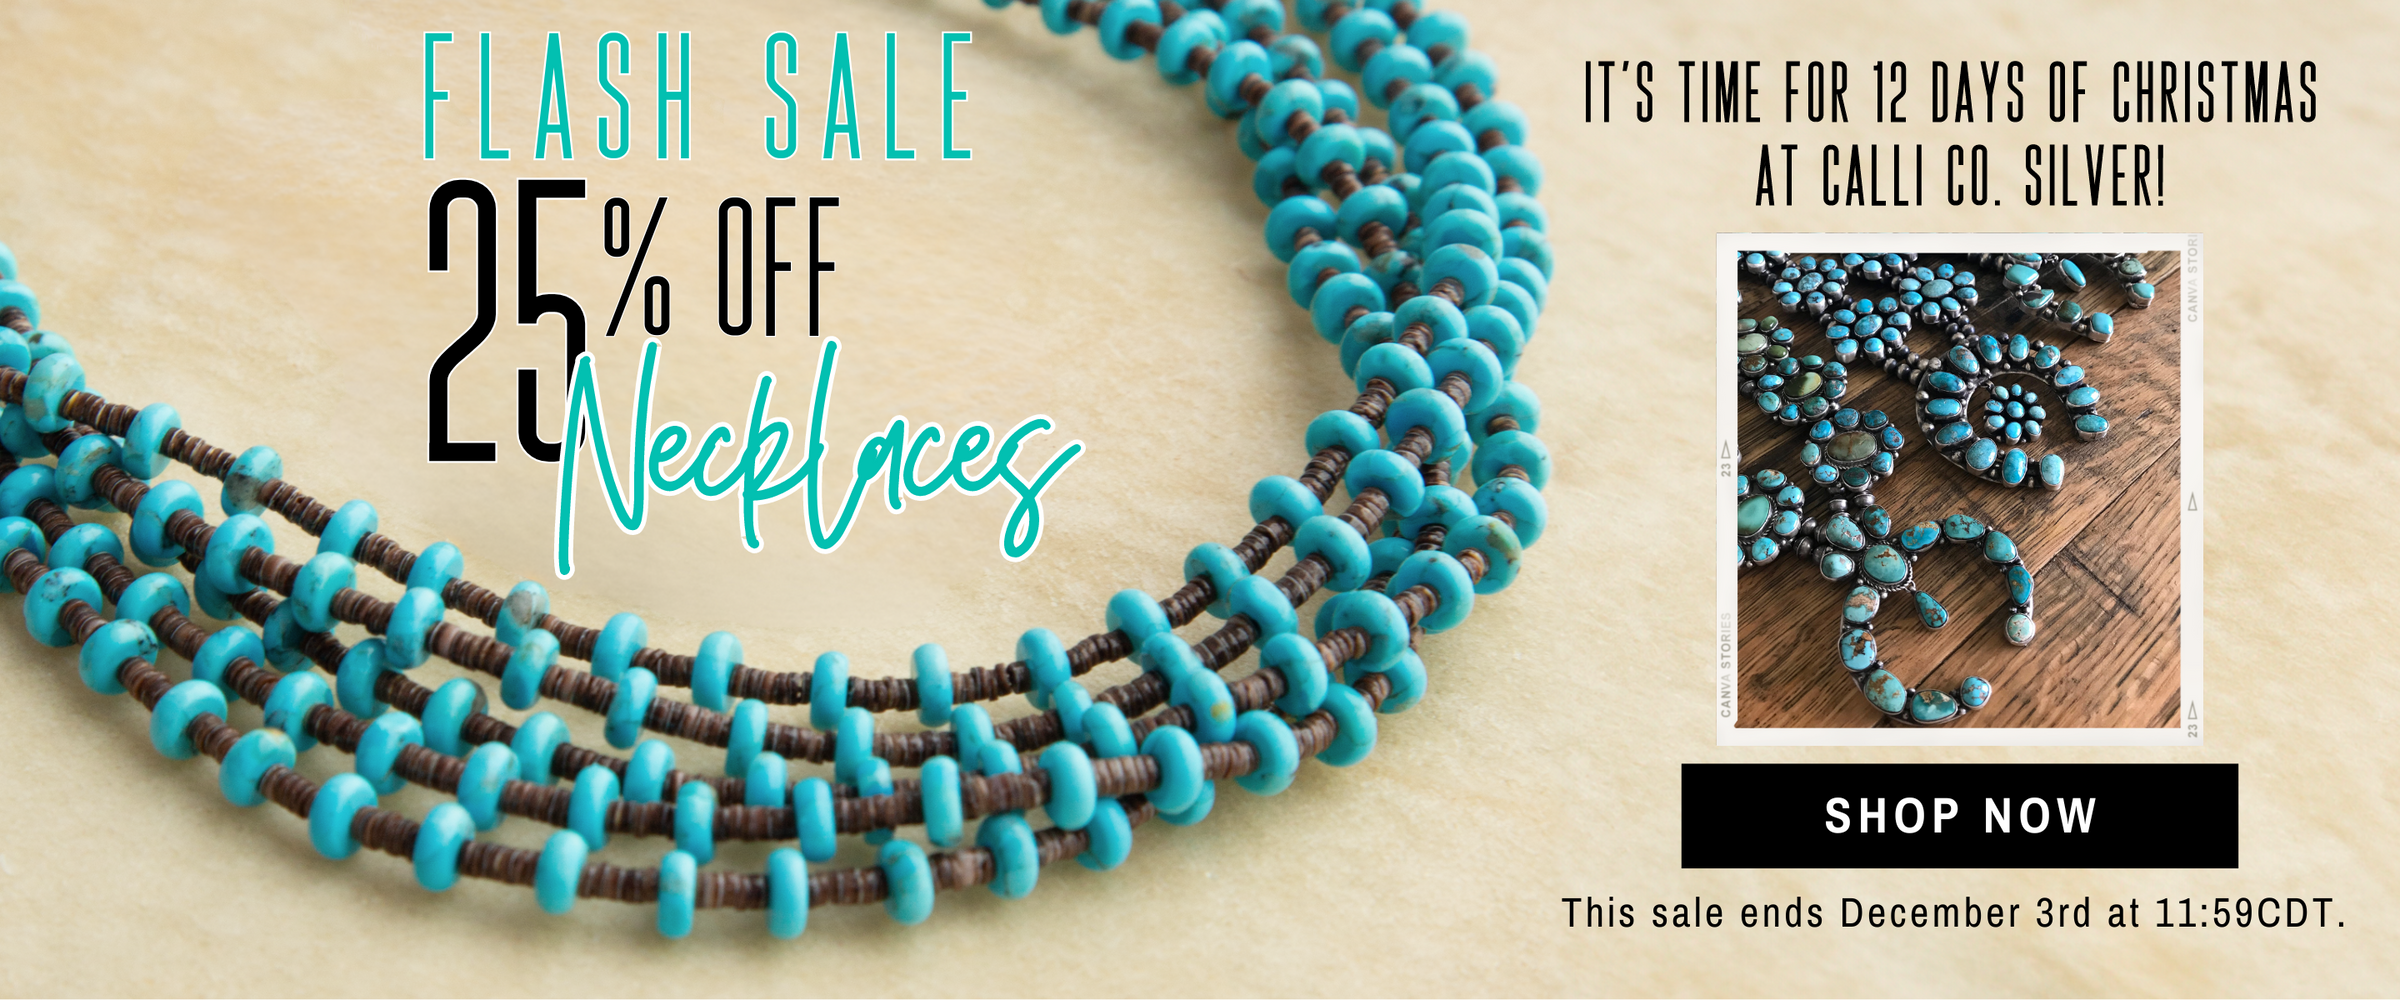 Necklaces Collection Sale | Calli Co. Silver | Handmade Sterling Silver and Turquoise Jewelry | Located in Fort Worth, TX